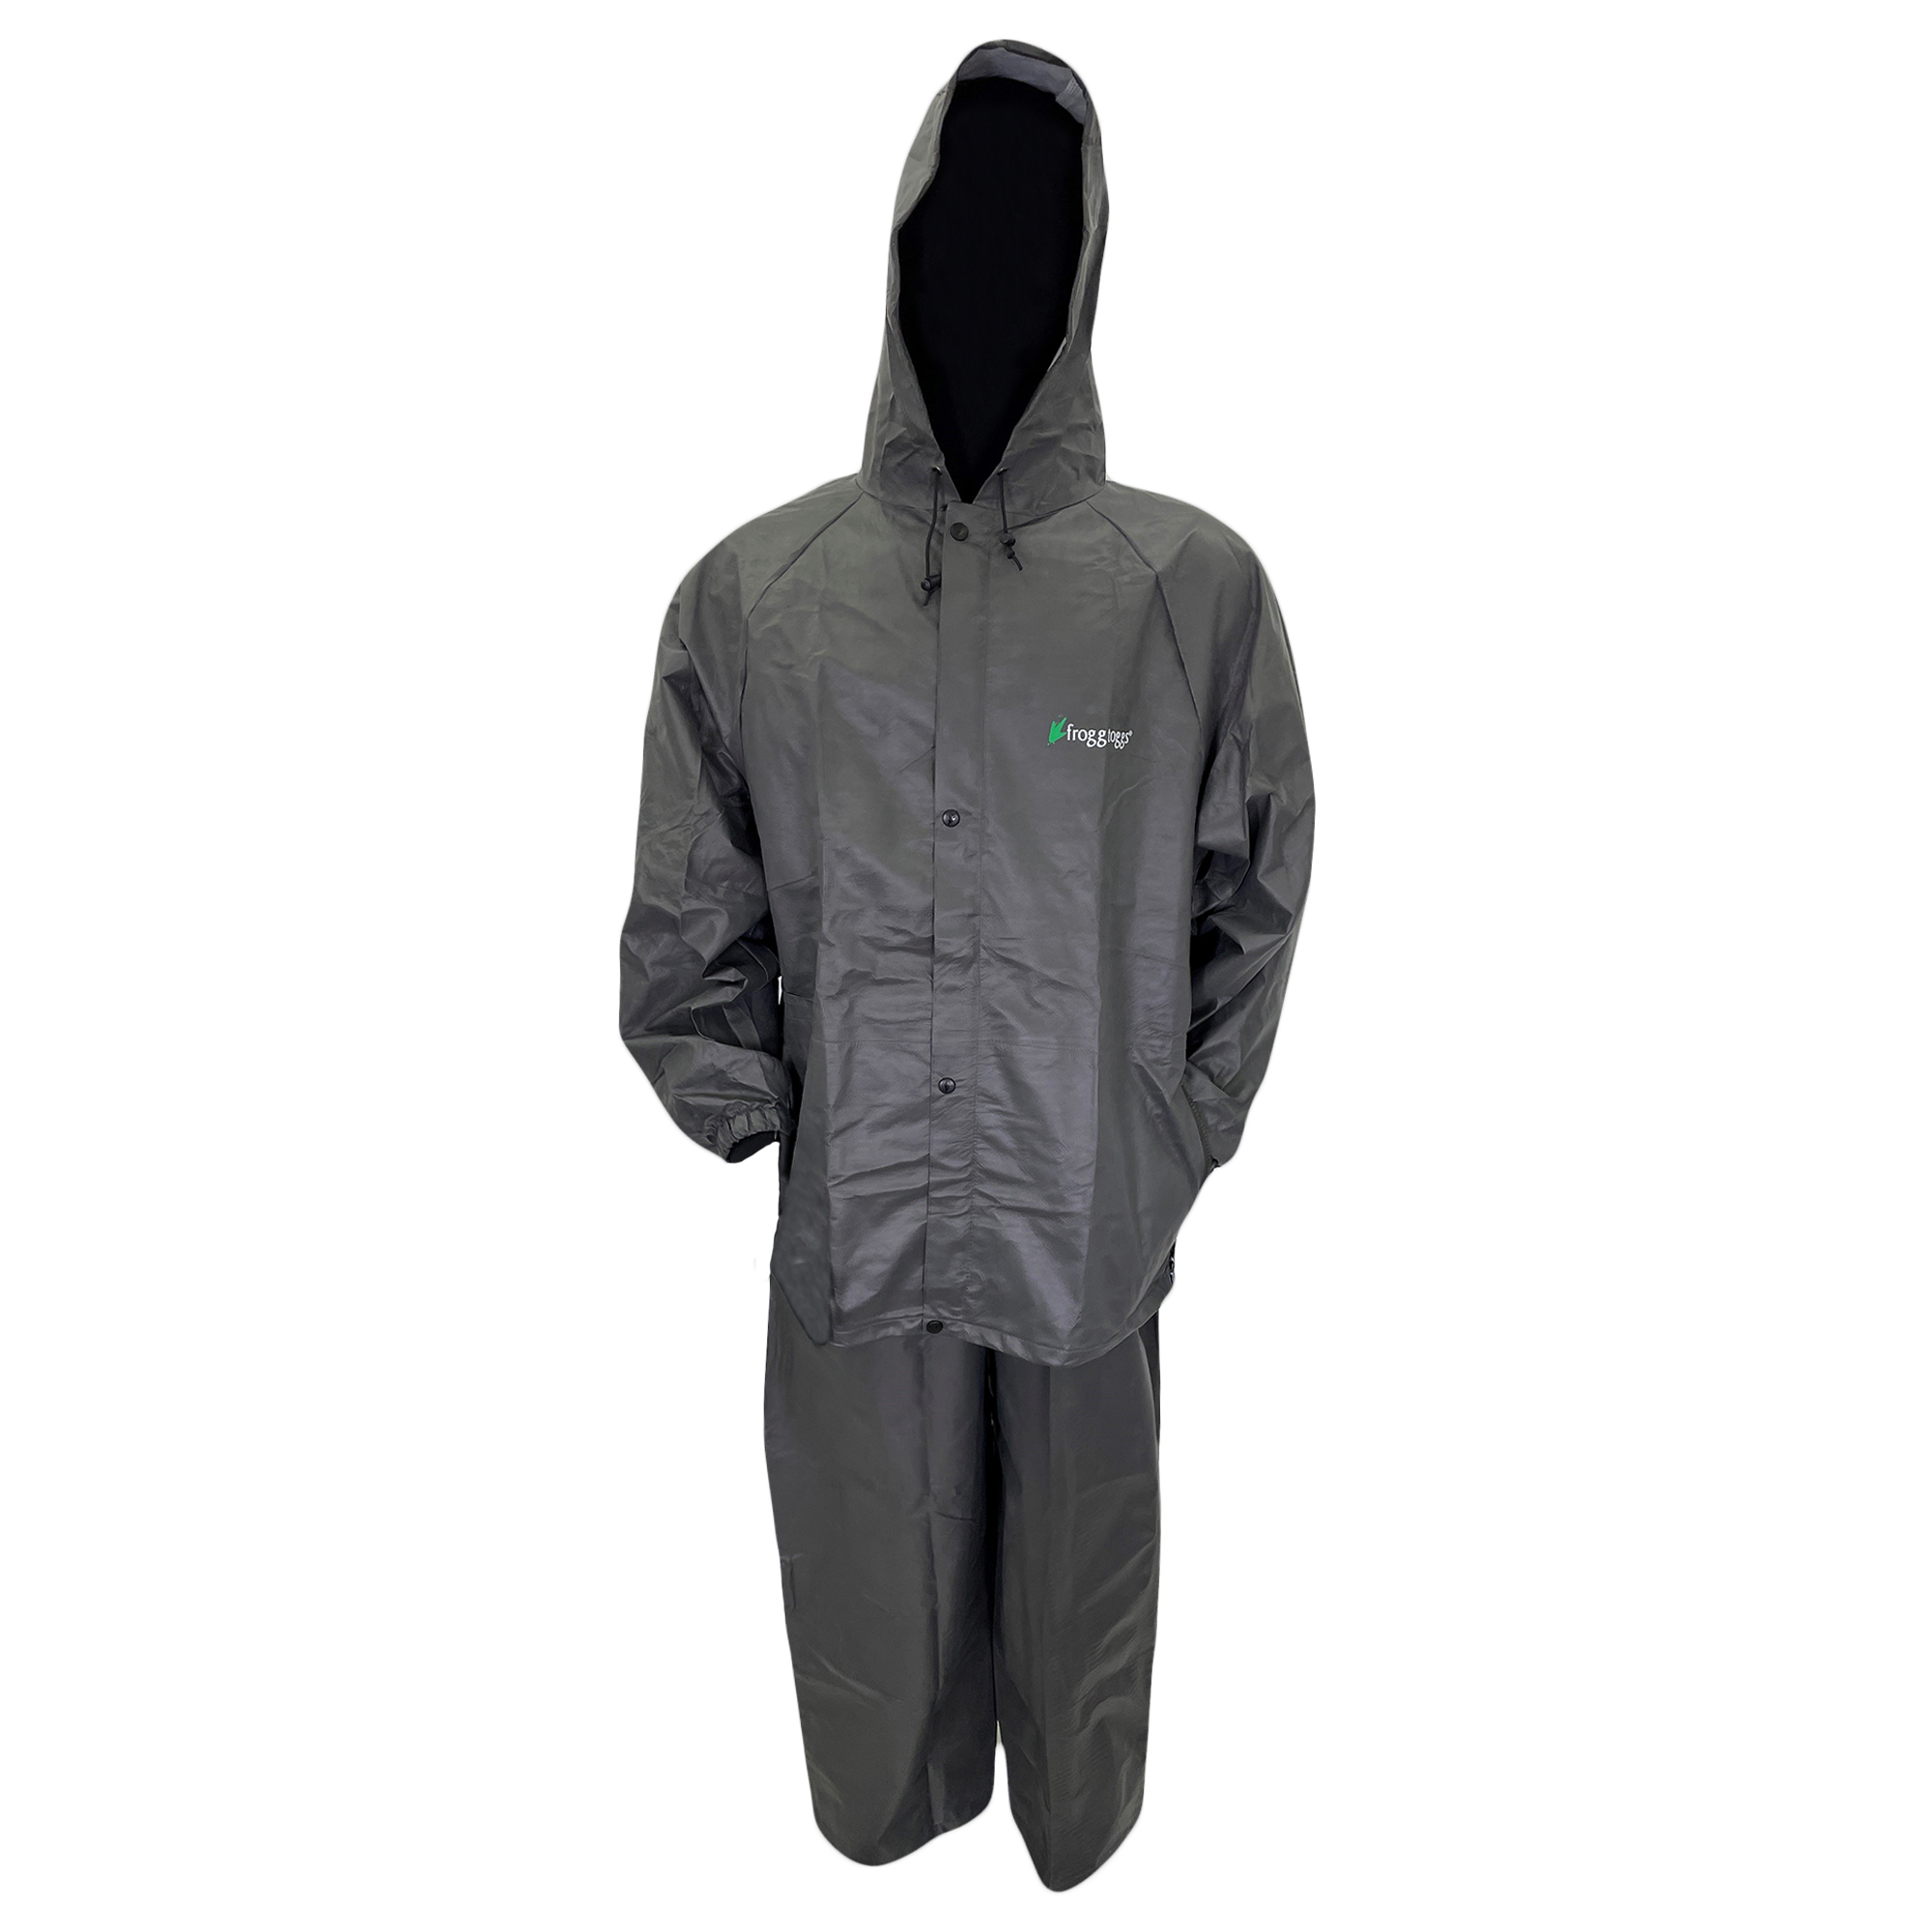 Frogg Toggs Men's Pro Lite Rain Suit with Pockets 